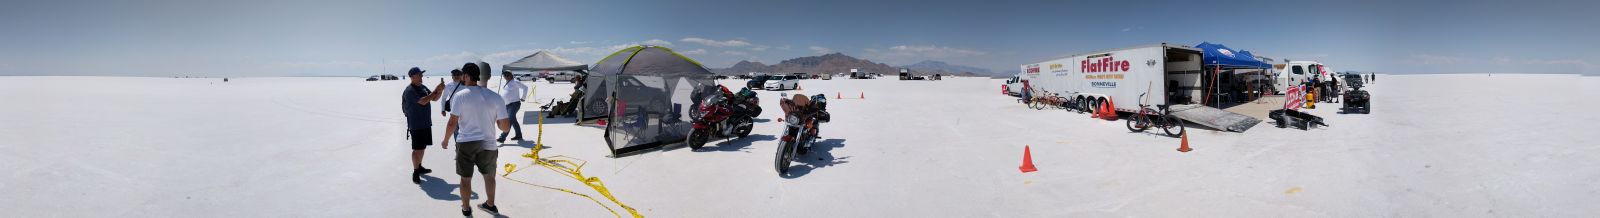 Illustration for article titled Made it to Bonneville Speedway